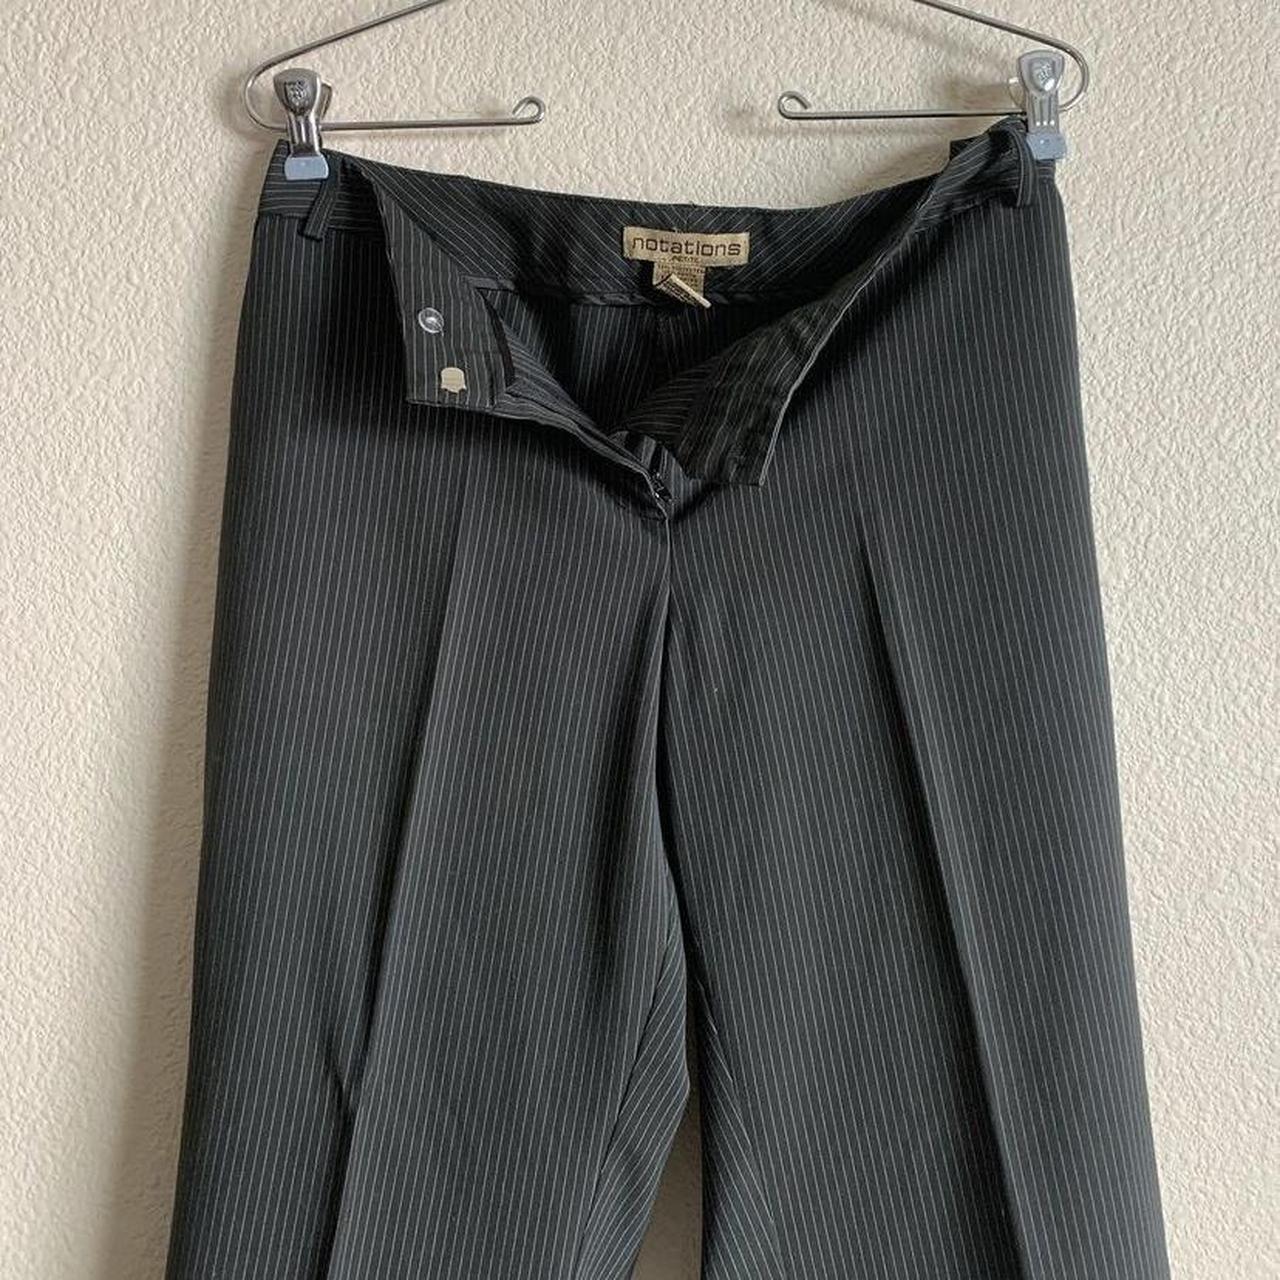 Notations Women's Black and Grey Trousers